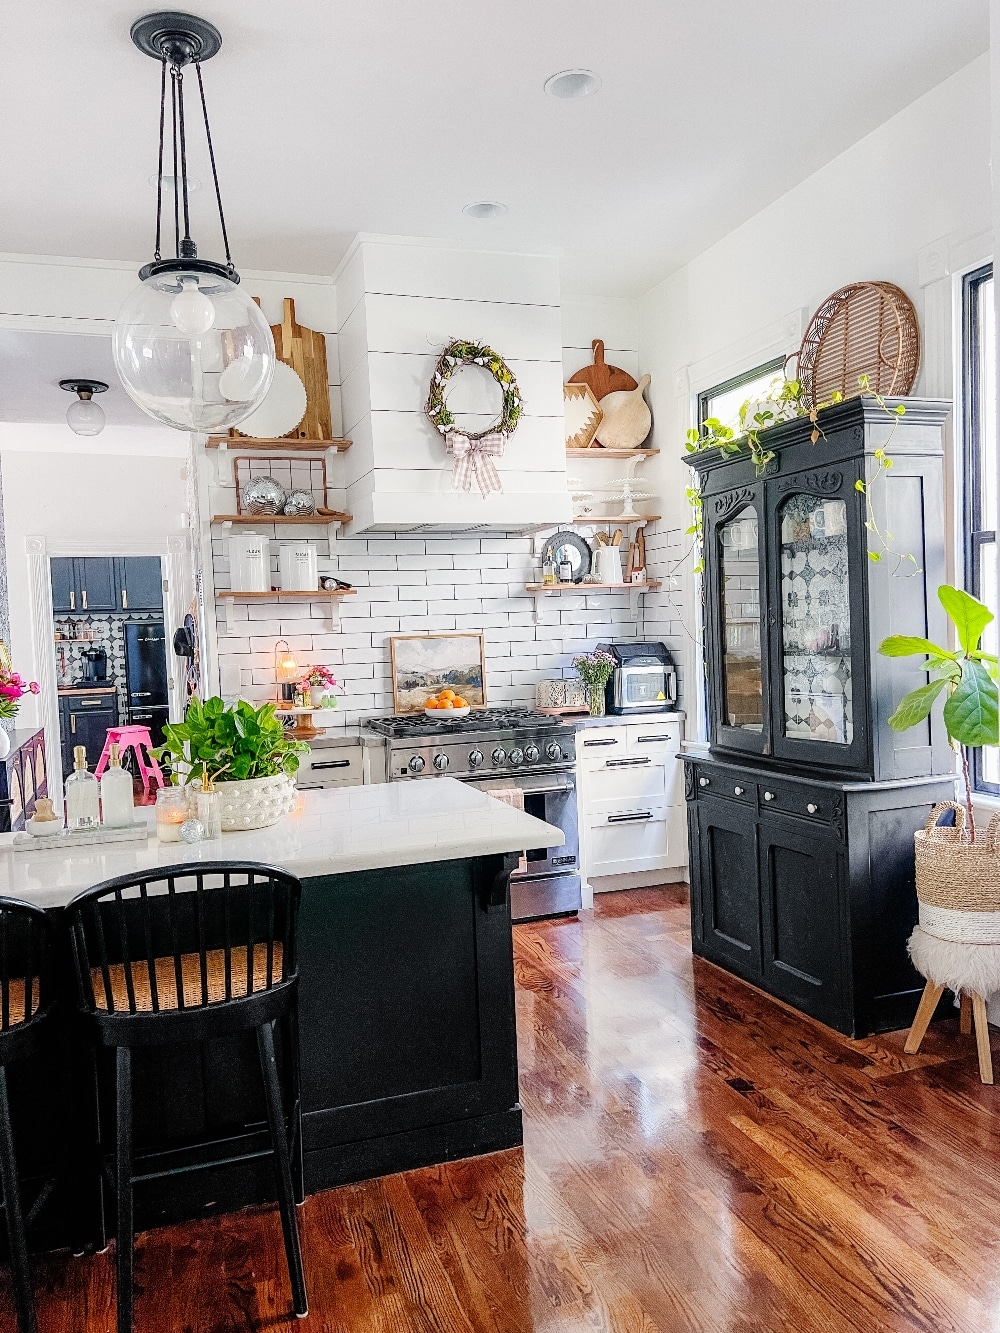 1891 Cottage Summer Home Ideas. Discover numerous inexpensive ways to add comfortable summer style to your home, inspired by my 1891 house transformation.